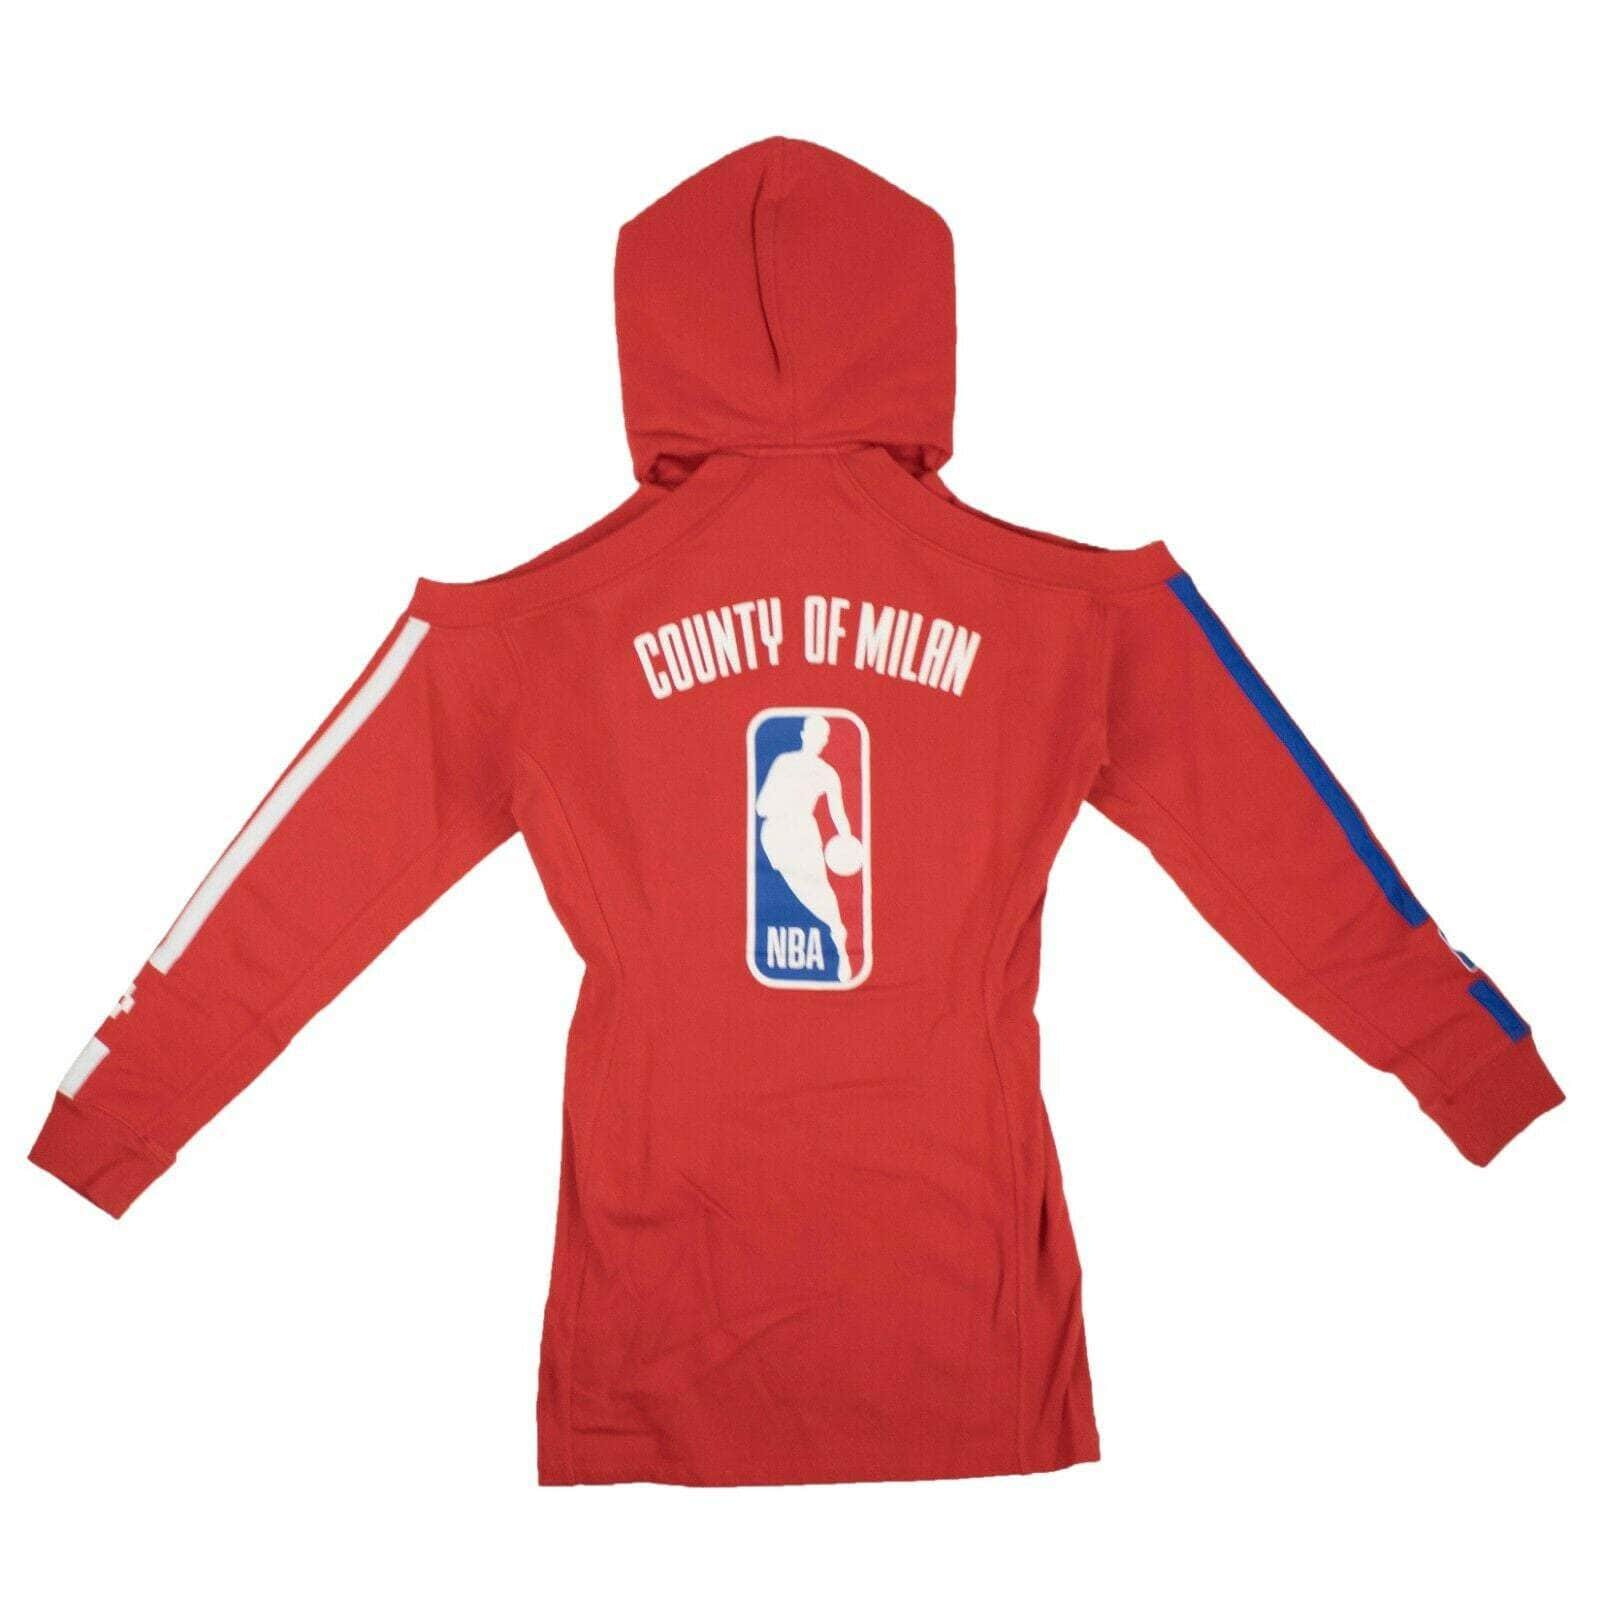 MARCELO BURLON X NBA 250-500, couponcollection, gender-womens, main-clothing, size-xs XS Red Hooded Short Dress 84SP-MB-1042/XS 84SP-MB-1042/XS